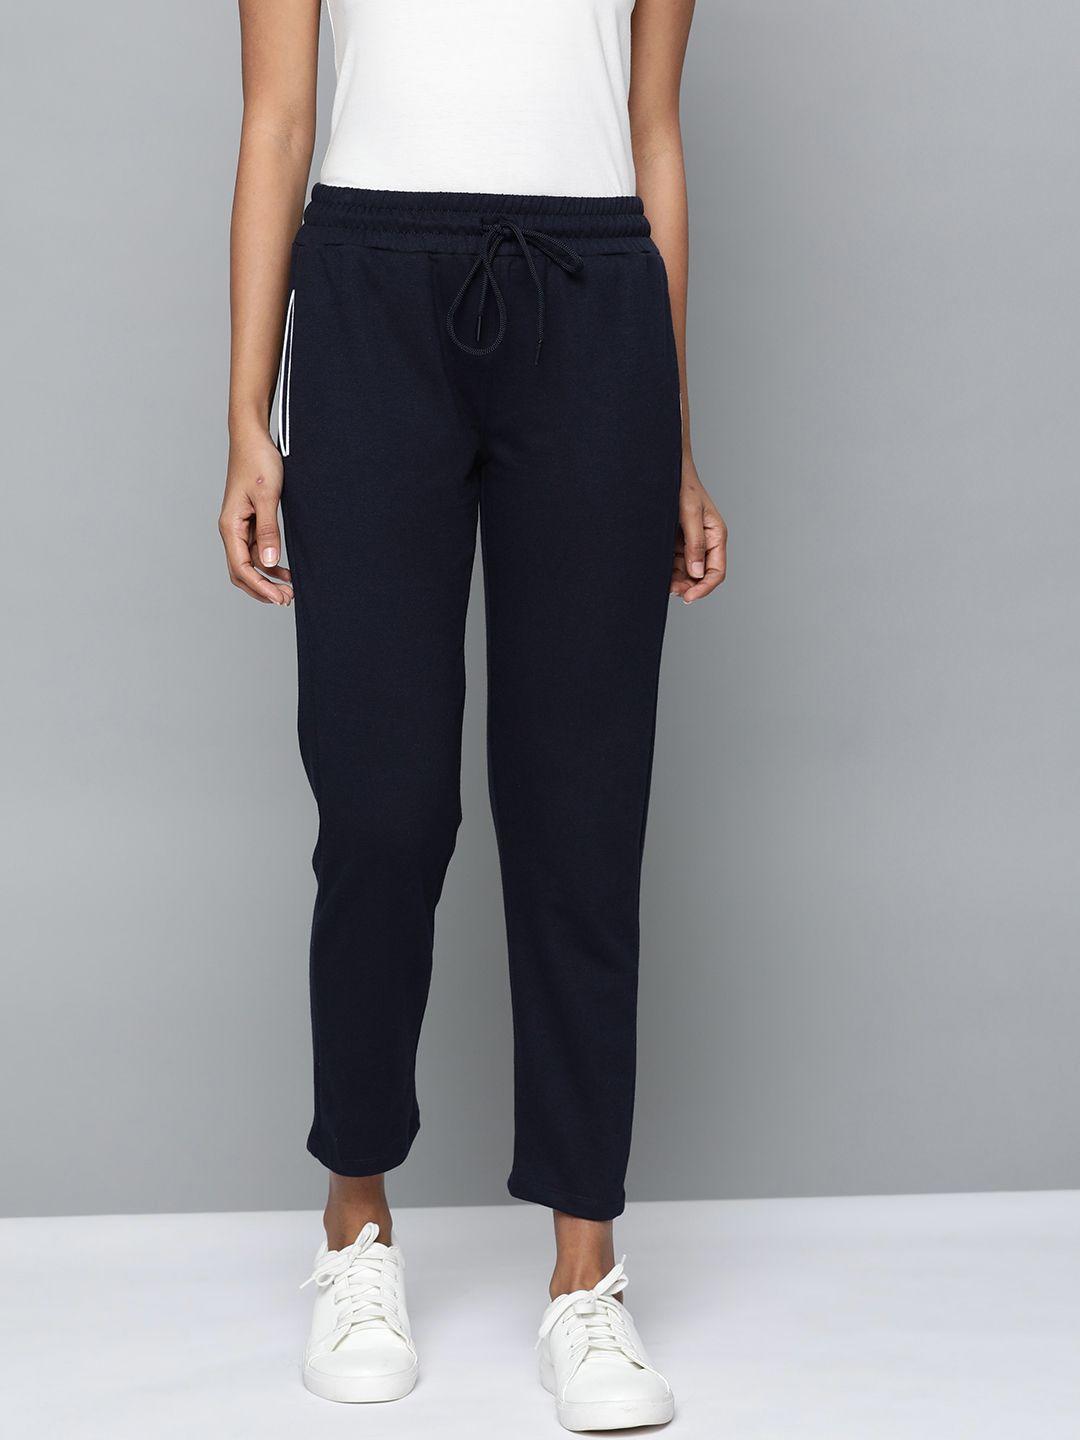 harvard women navy blue straight fit cropped track pants